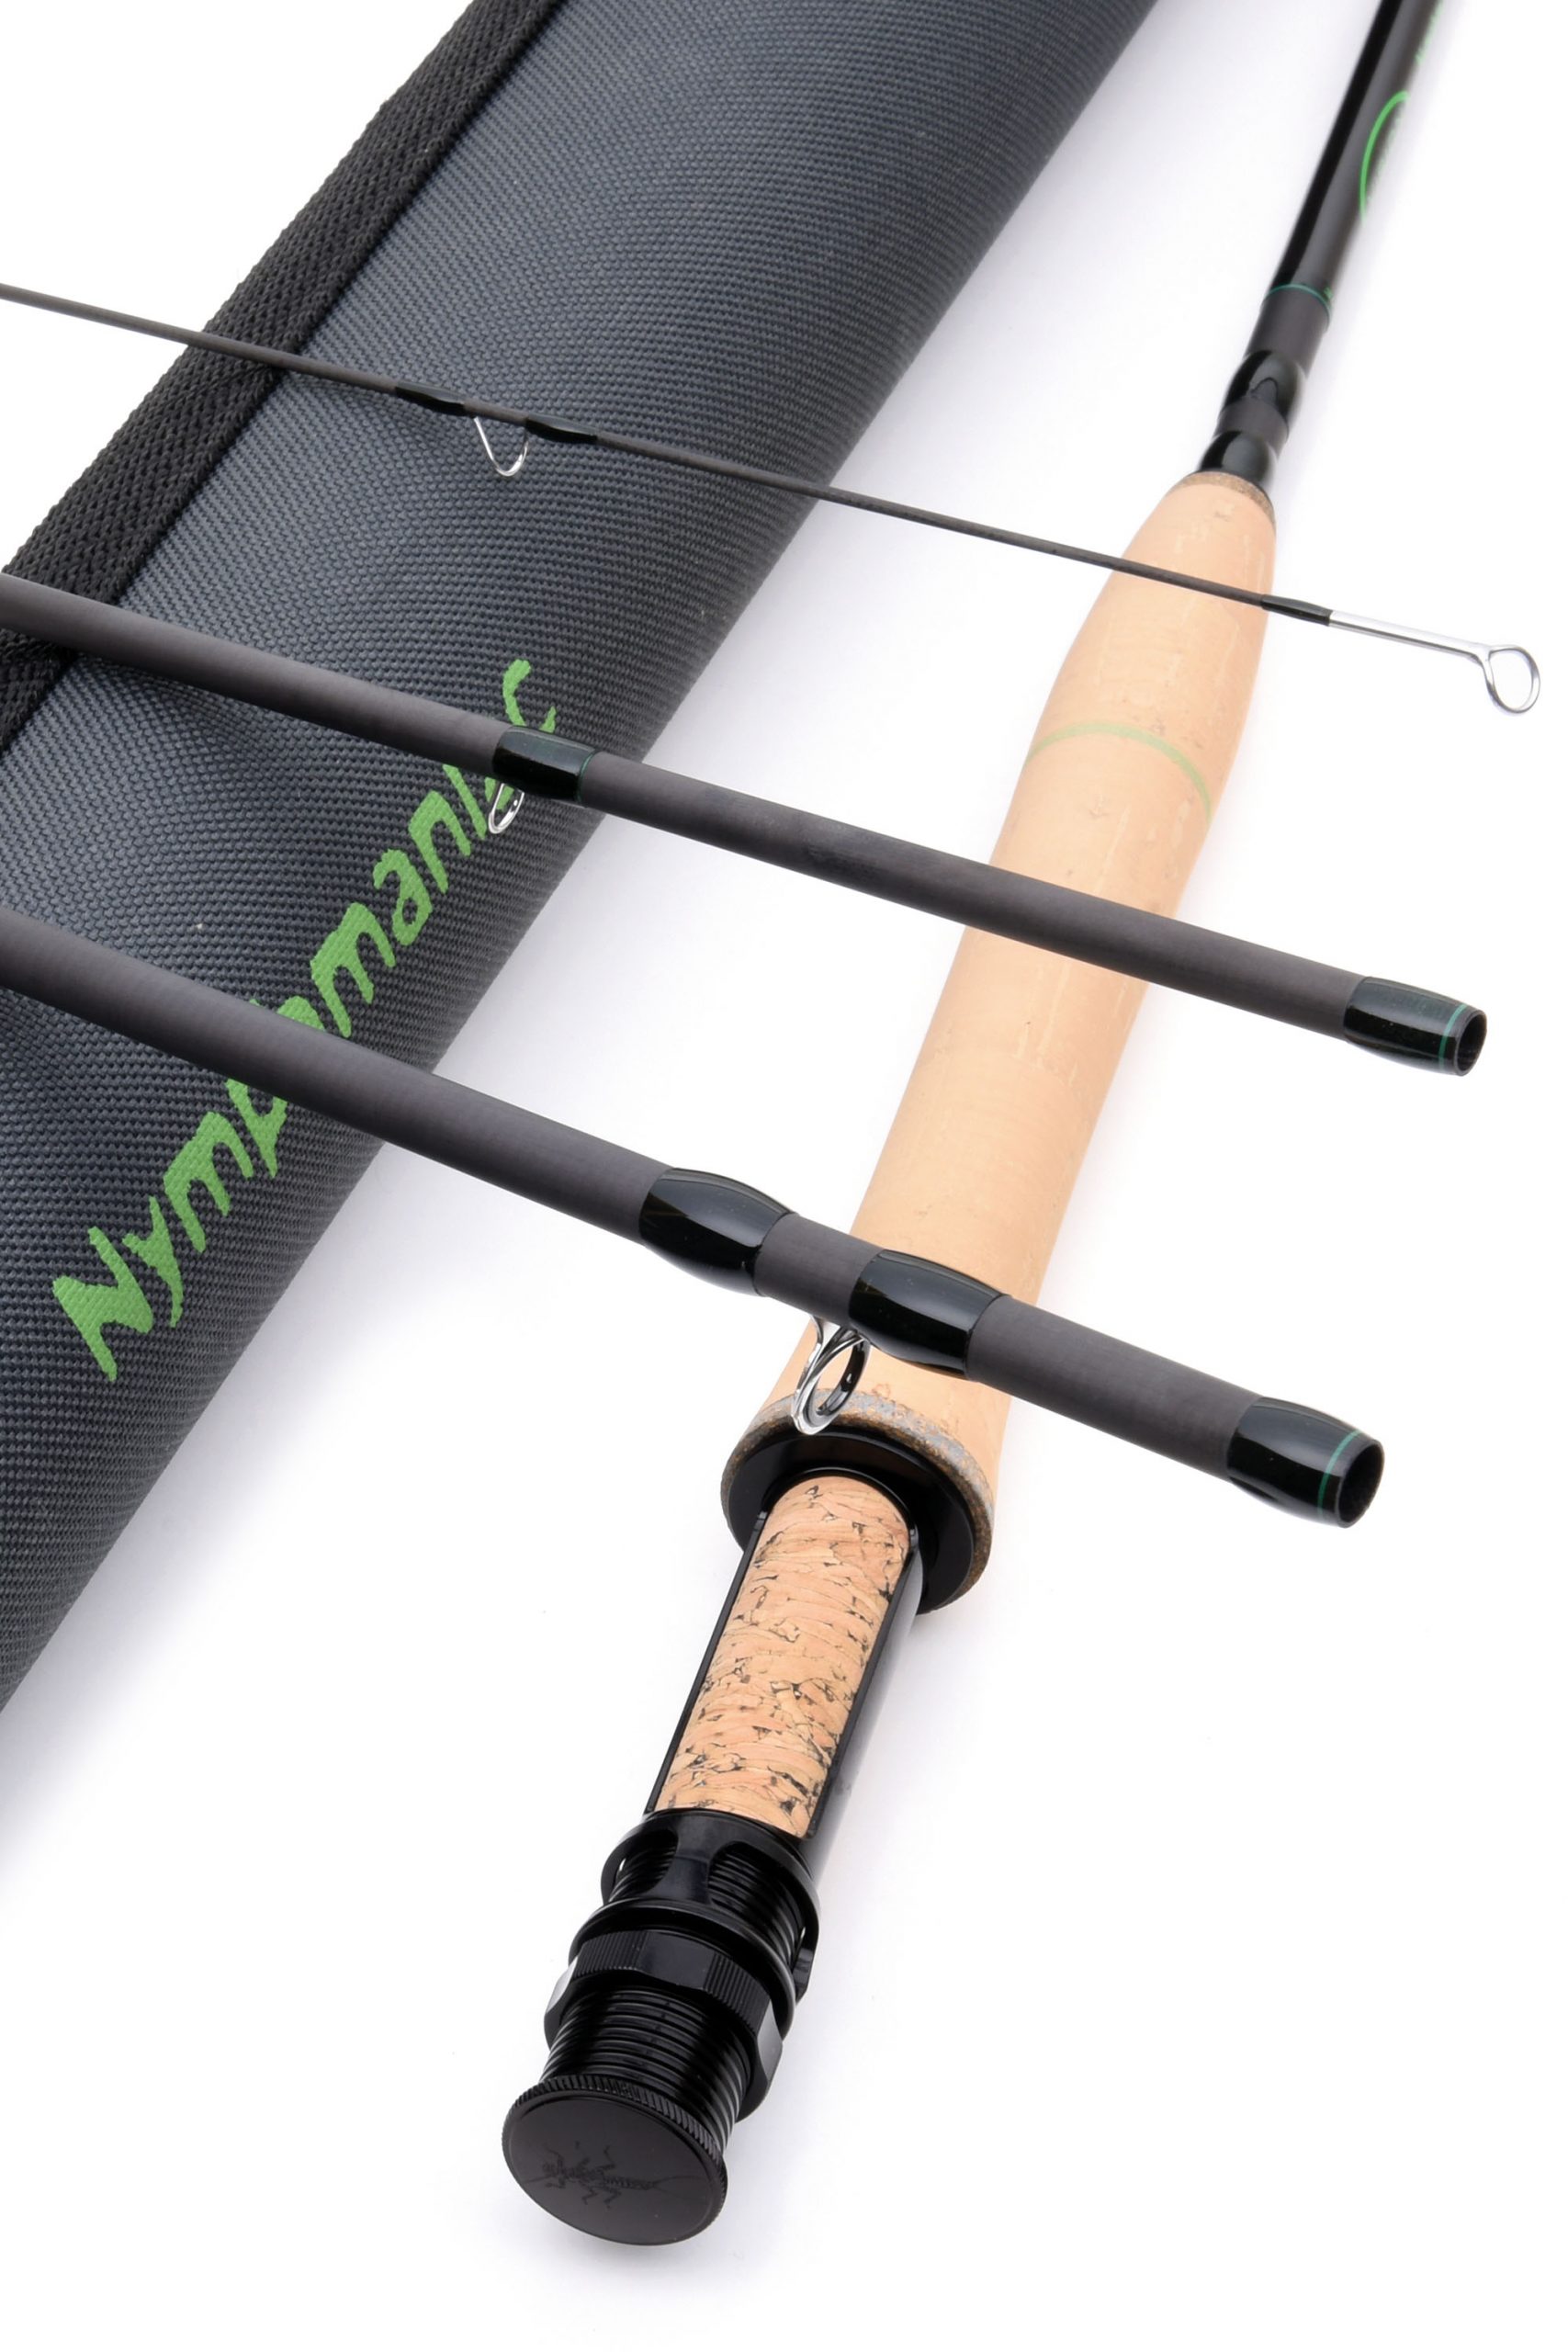 Vision Nymphmaniac Fly Rod 11 Foot #3 For Fly Fishing